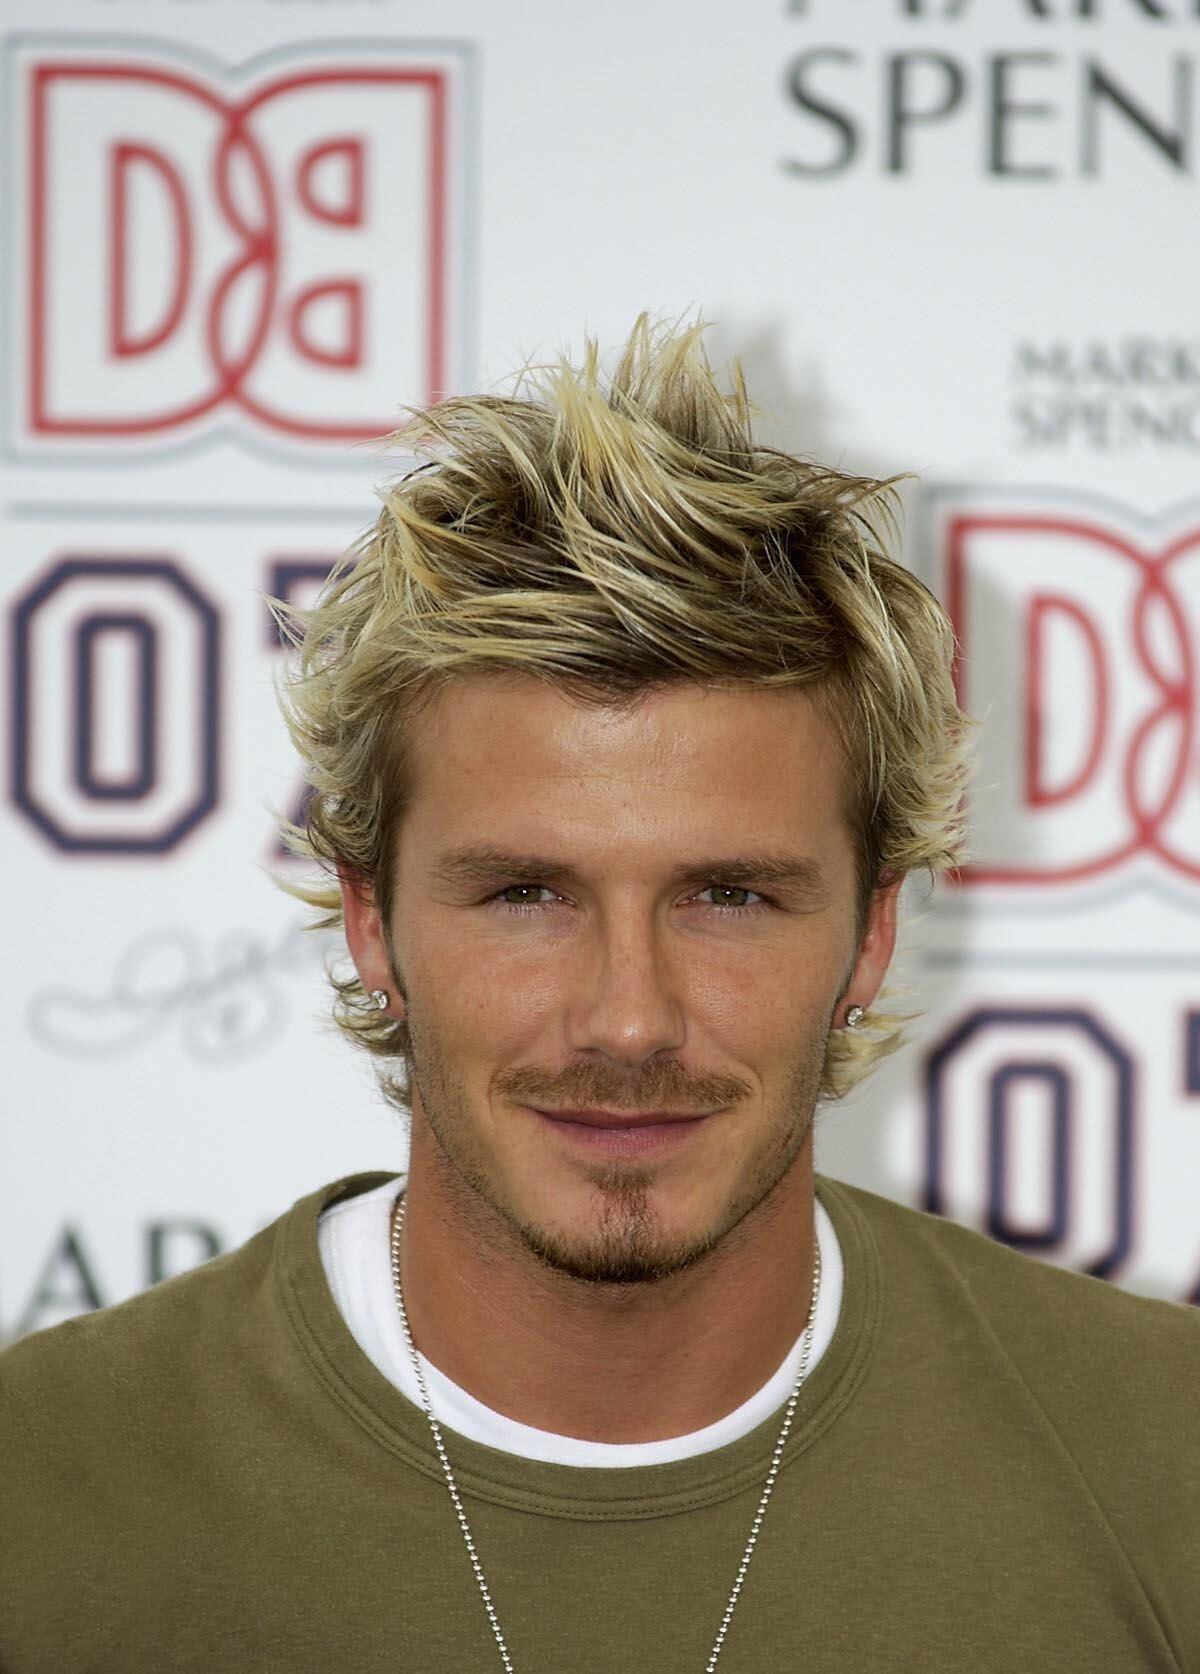 Charting David Beckham's style journey in 43 photos: How the